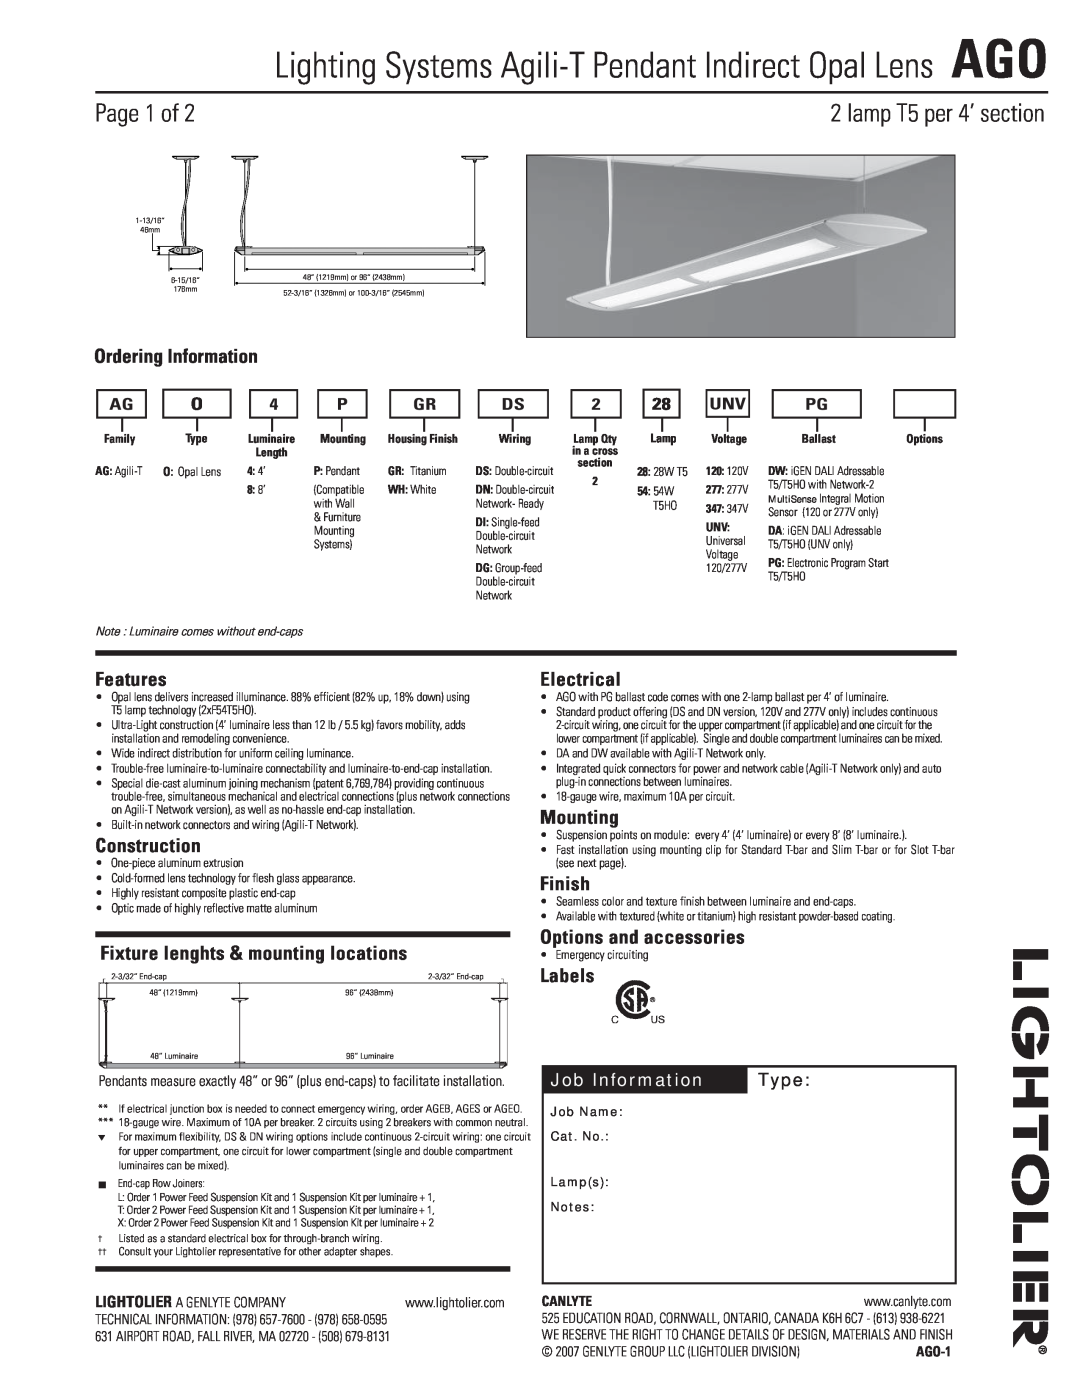 Lightolier AGO manual Page 1 of, lamp T5 per 4’ section, Ordering Information, Features, Construction, Electrical, Finish 